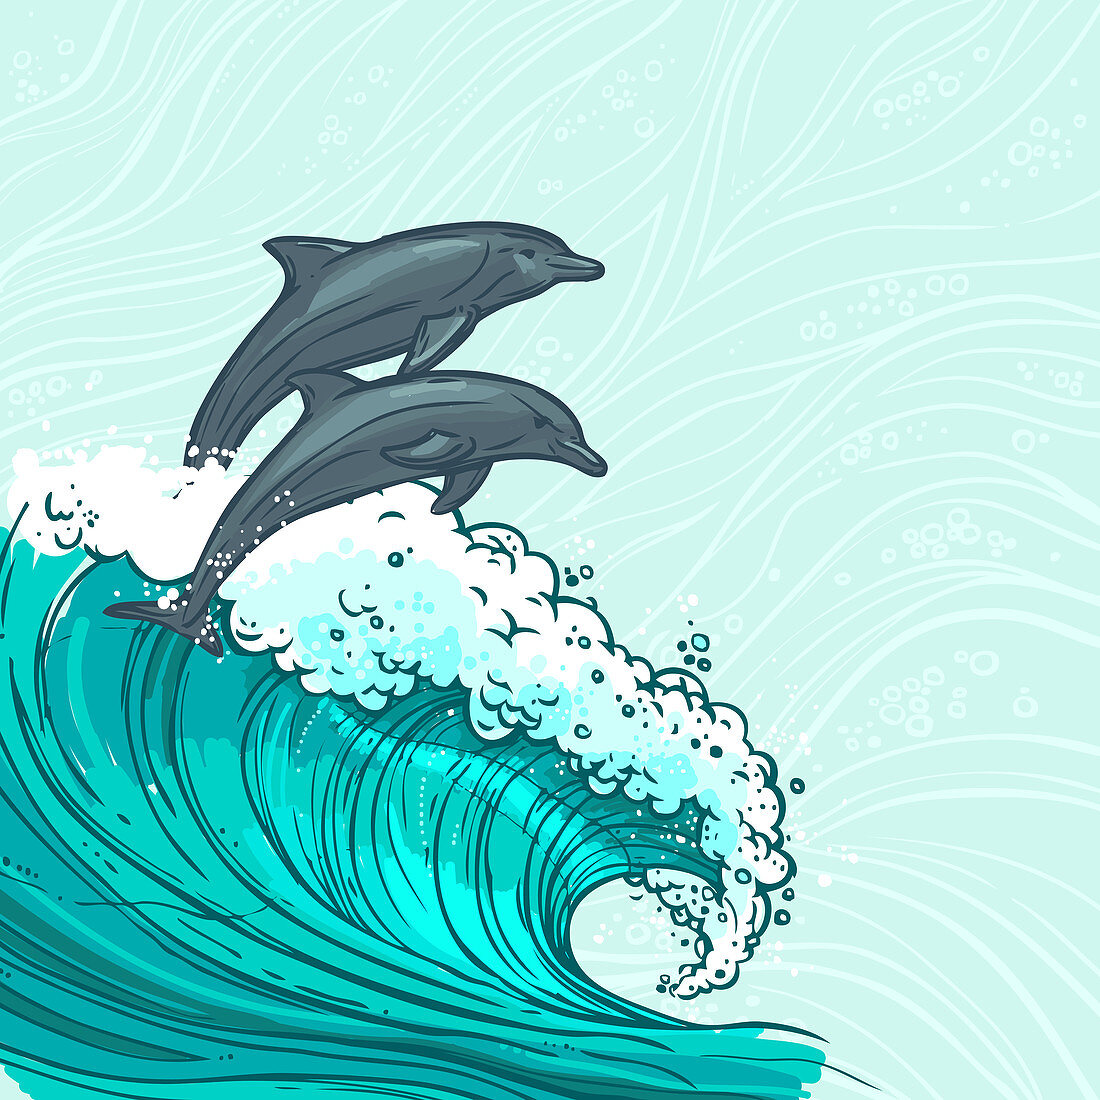 Ocean and dolphins, illustration